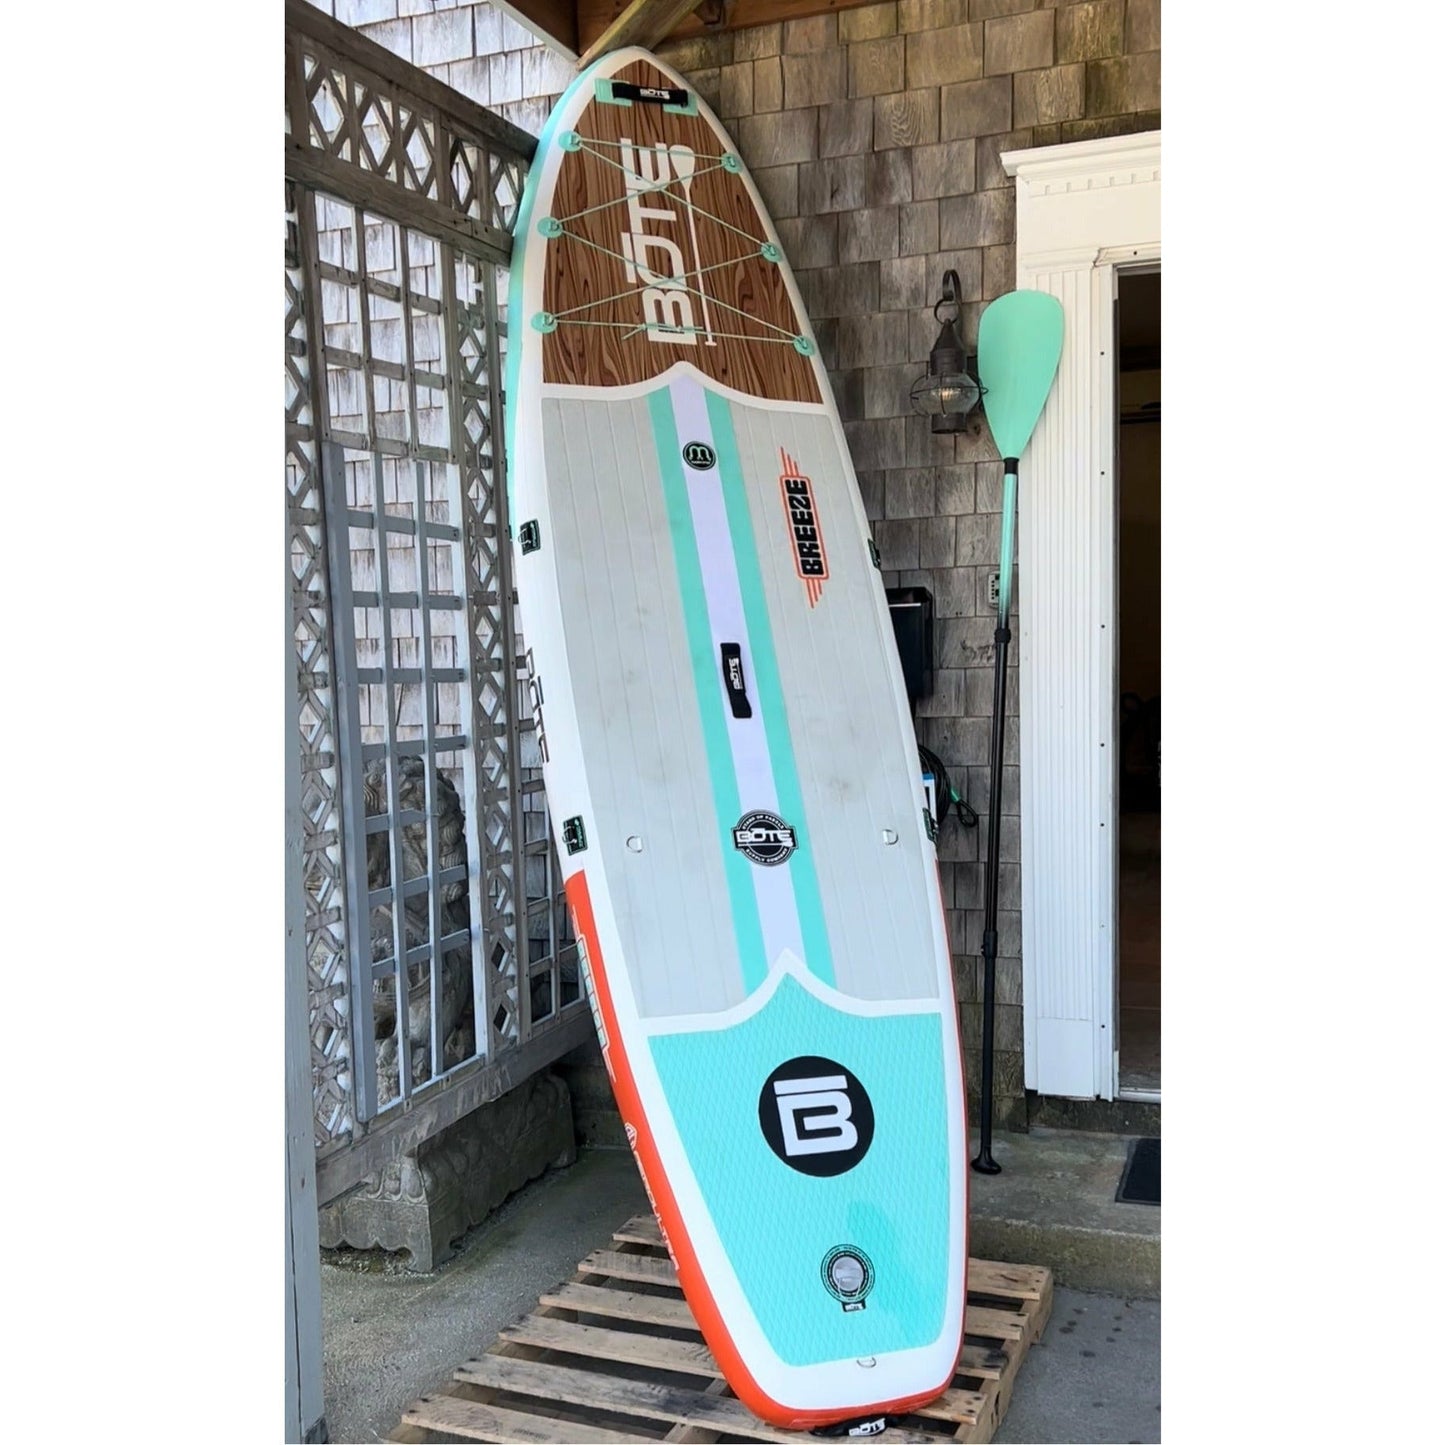 Complimentary Stand-Up Paddle Board (Inflatable) - First Come, First Serve Basis!